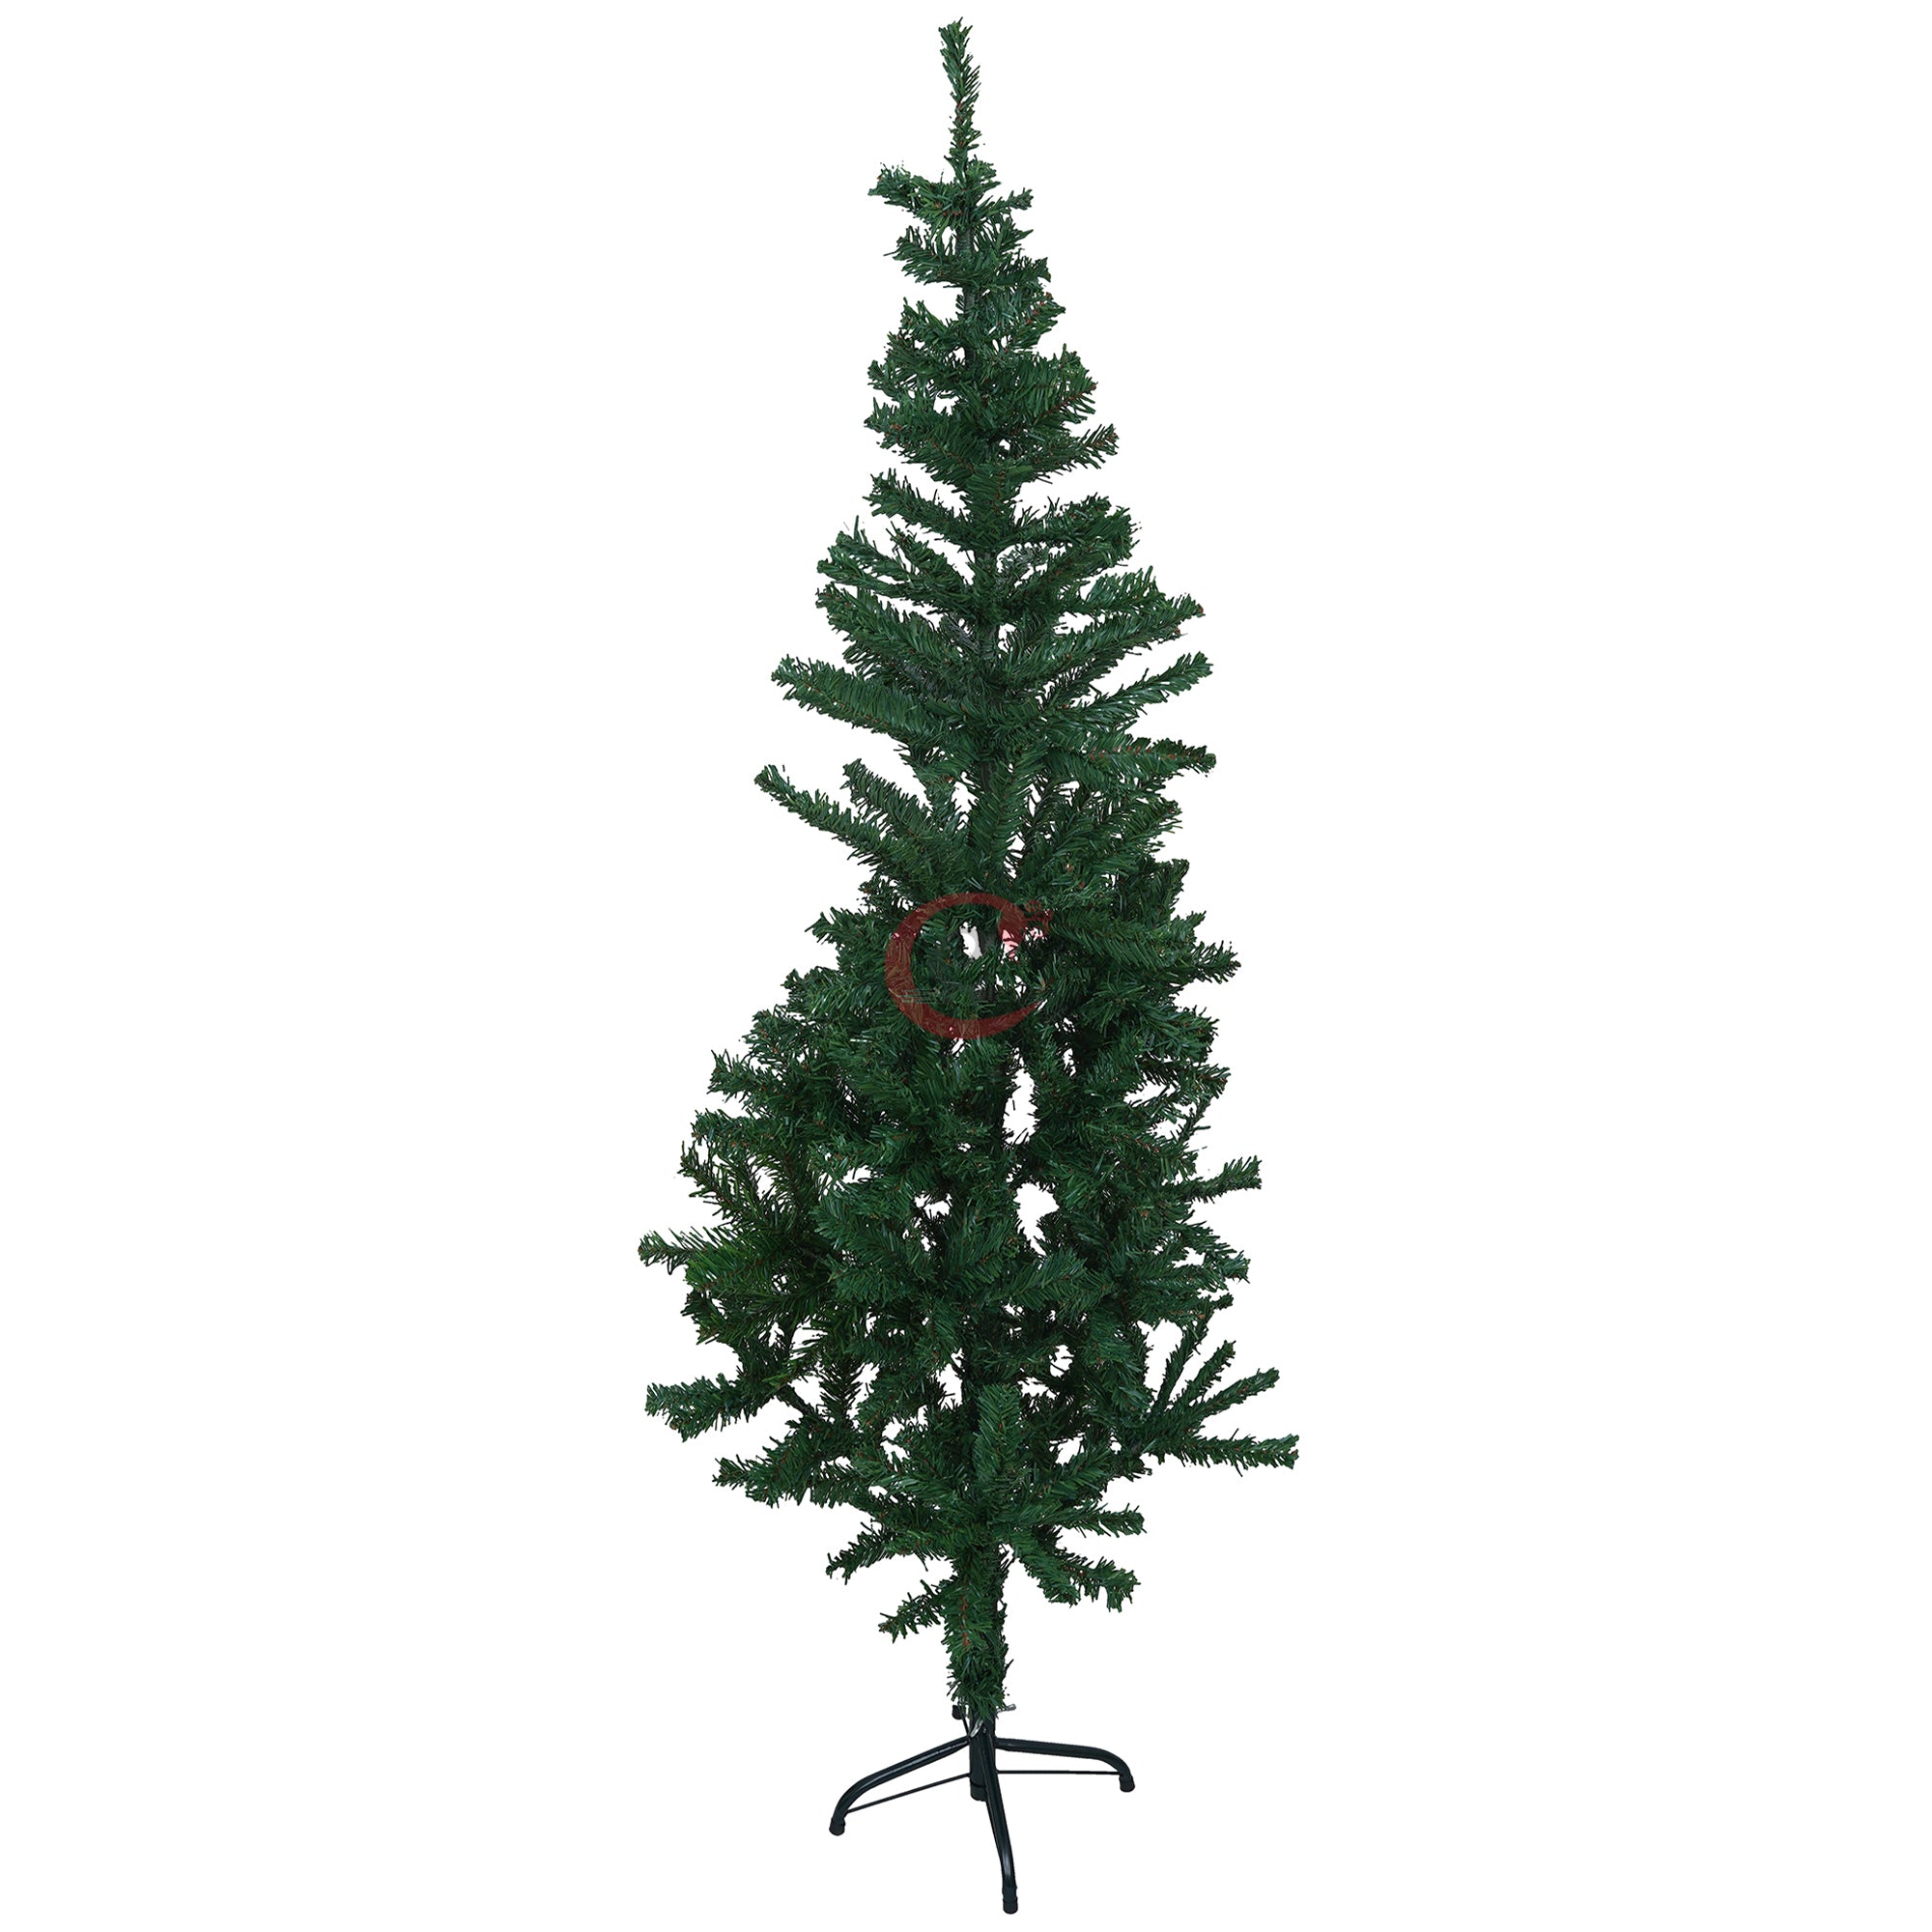 eCraftIndia 6 Feet Green Artificial Christmas Tree Xmas Pine Tree with Stand and 100 Christmas Decoration Ornaments Props - Merry Christmas Decoration Item for Home, Office, and Church 8